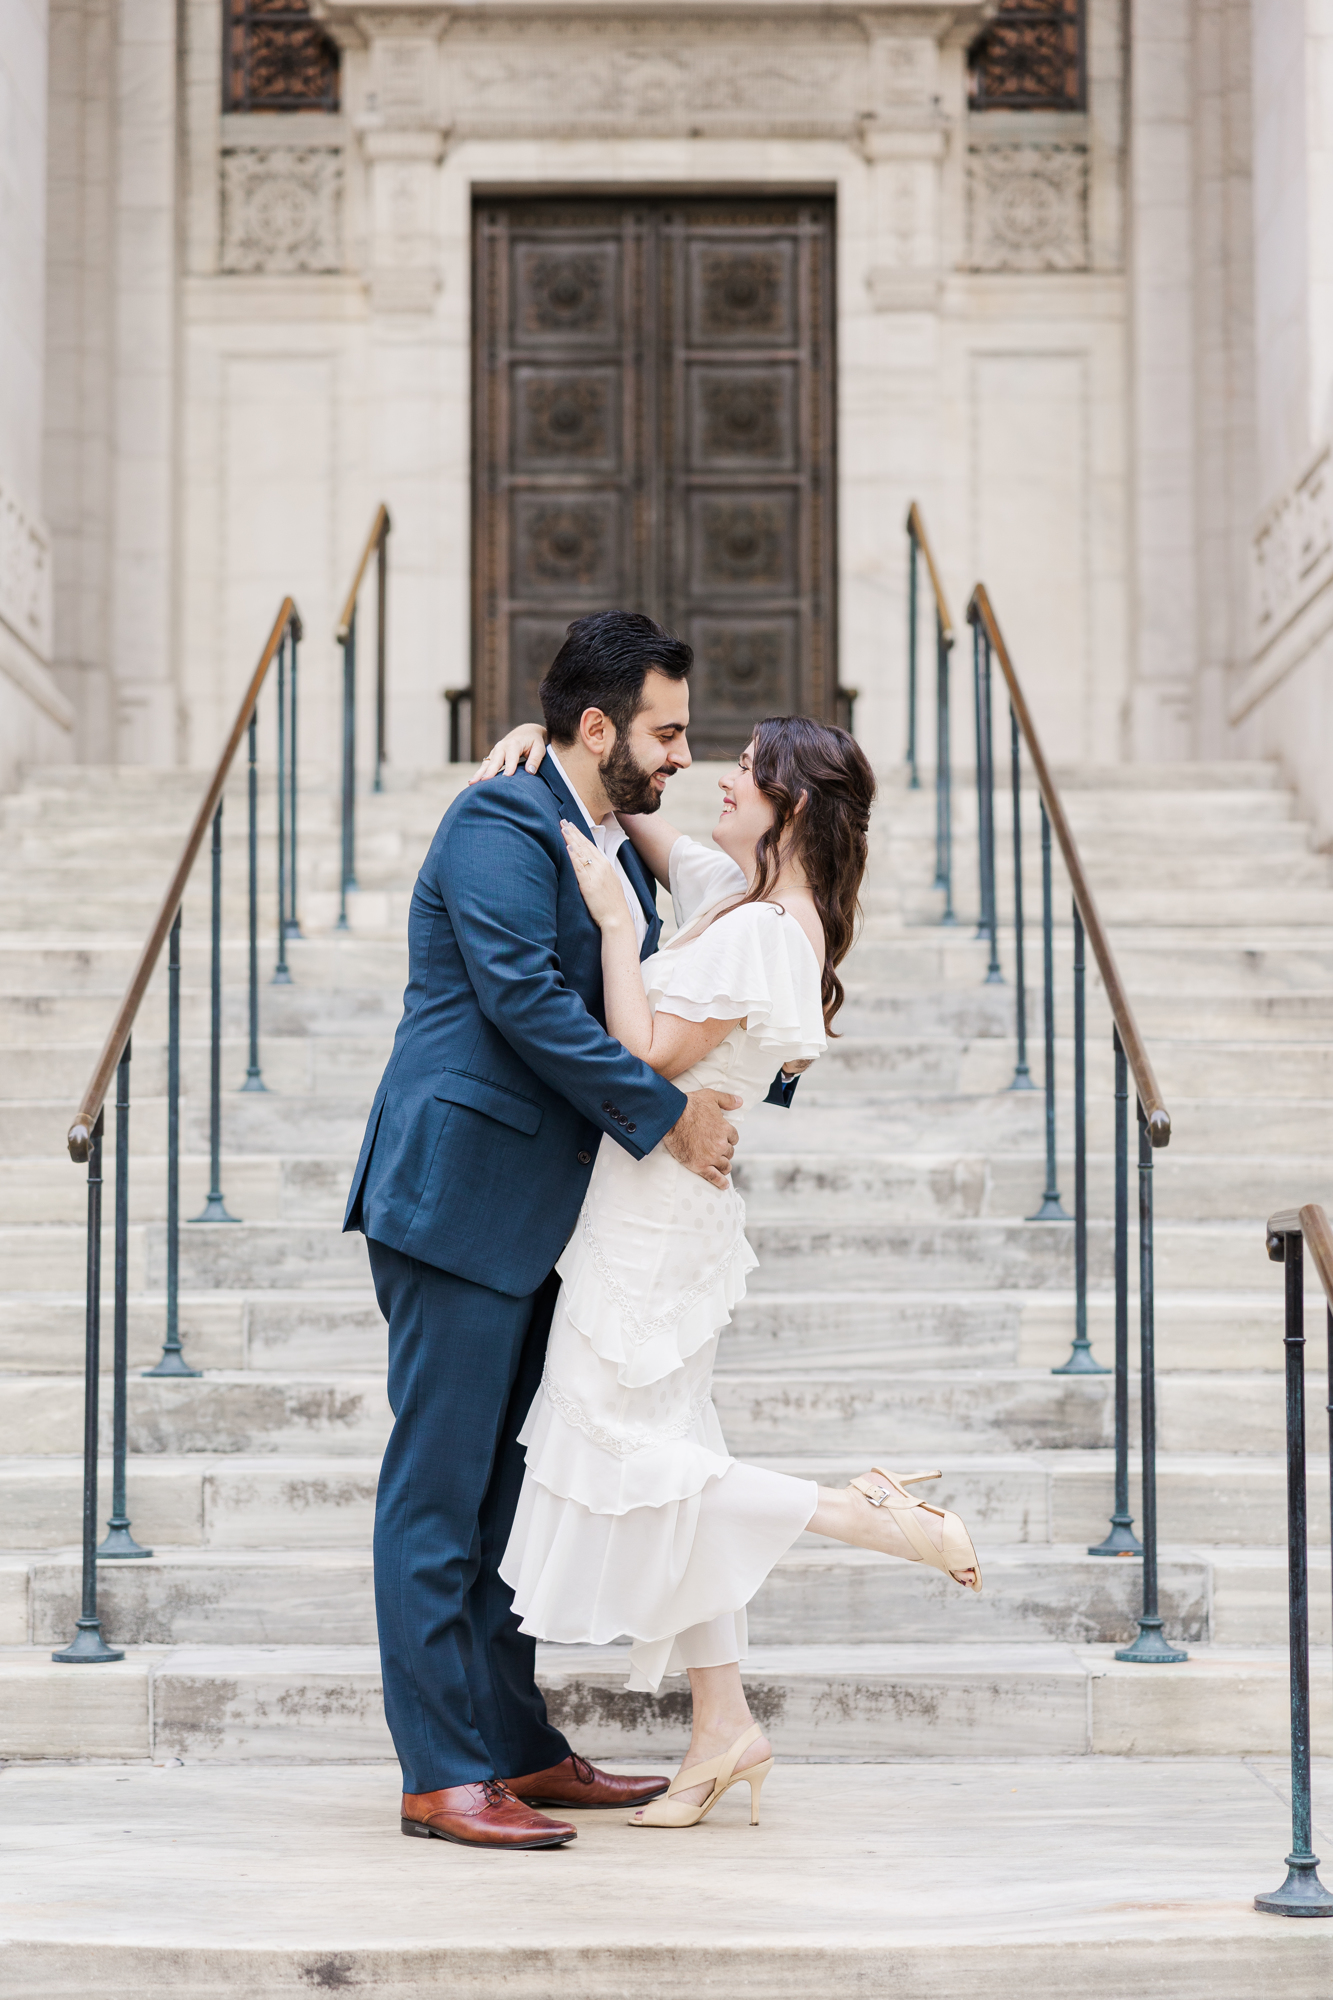 Personal Engagement Photos in New York